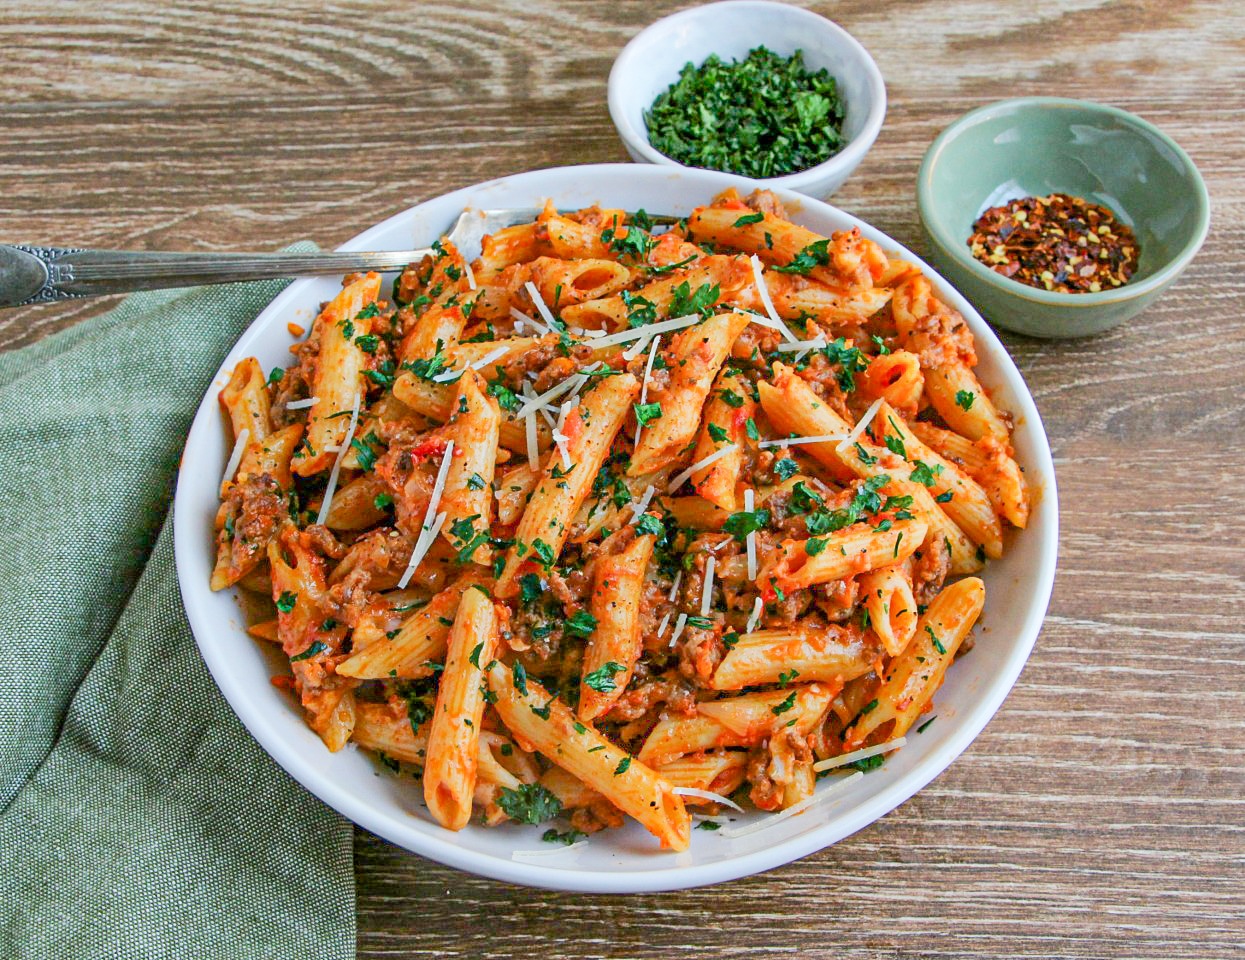 Mostaccioli Pasta garnished with cracked pepper and parsley in a white bowl with green napkin next to it.